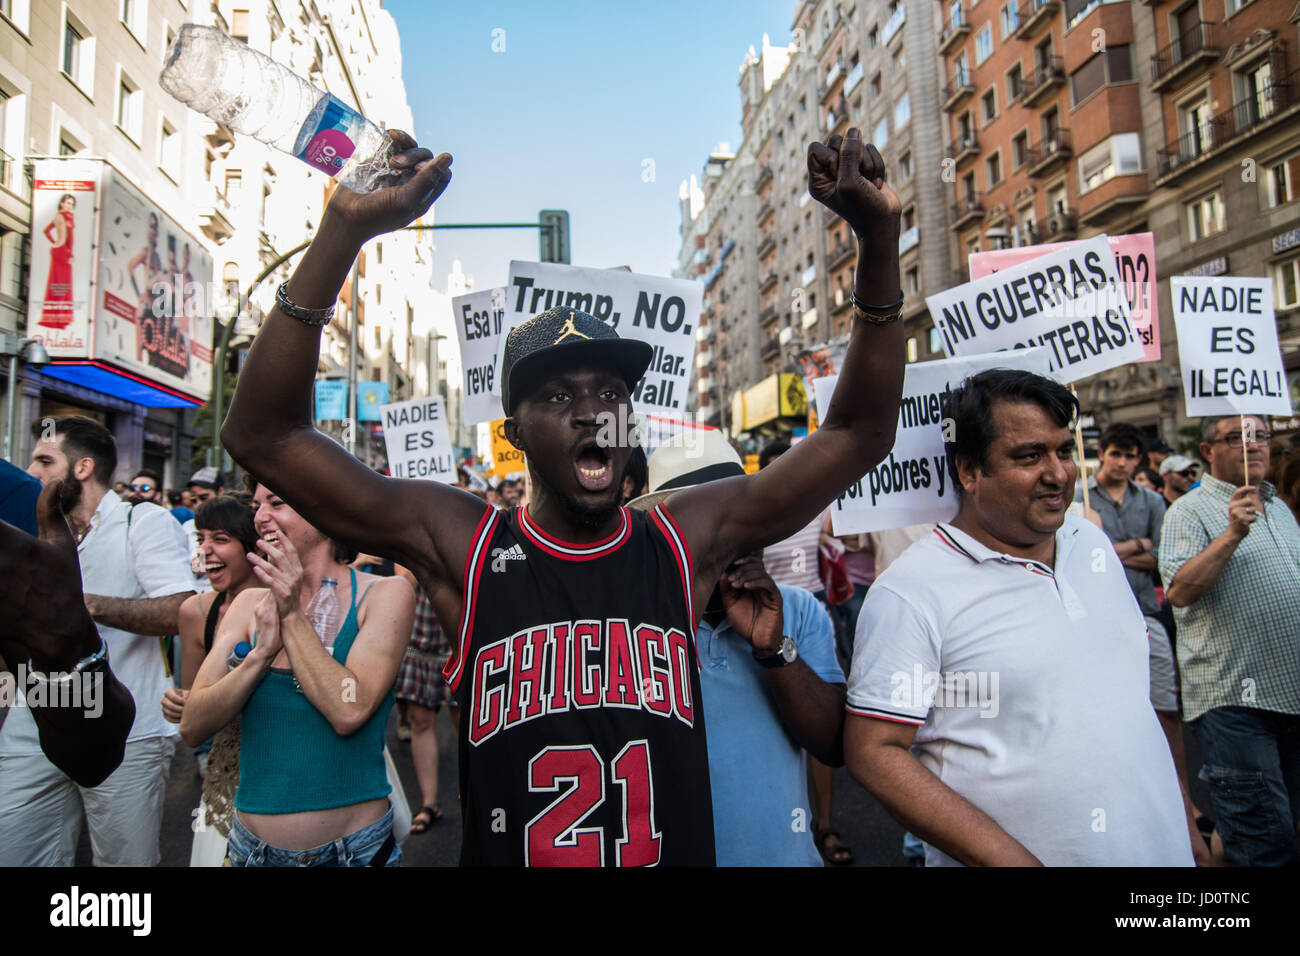 Madrid, Spain. 17th June, 2017. People demanding to welcome refugees during a demonstration against immigration policies. Credit: Marcos del Mazo/Alamy Live News Stock Photo